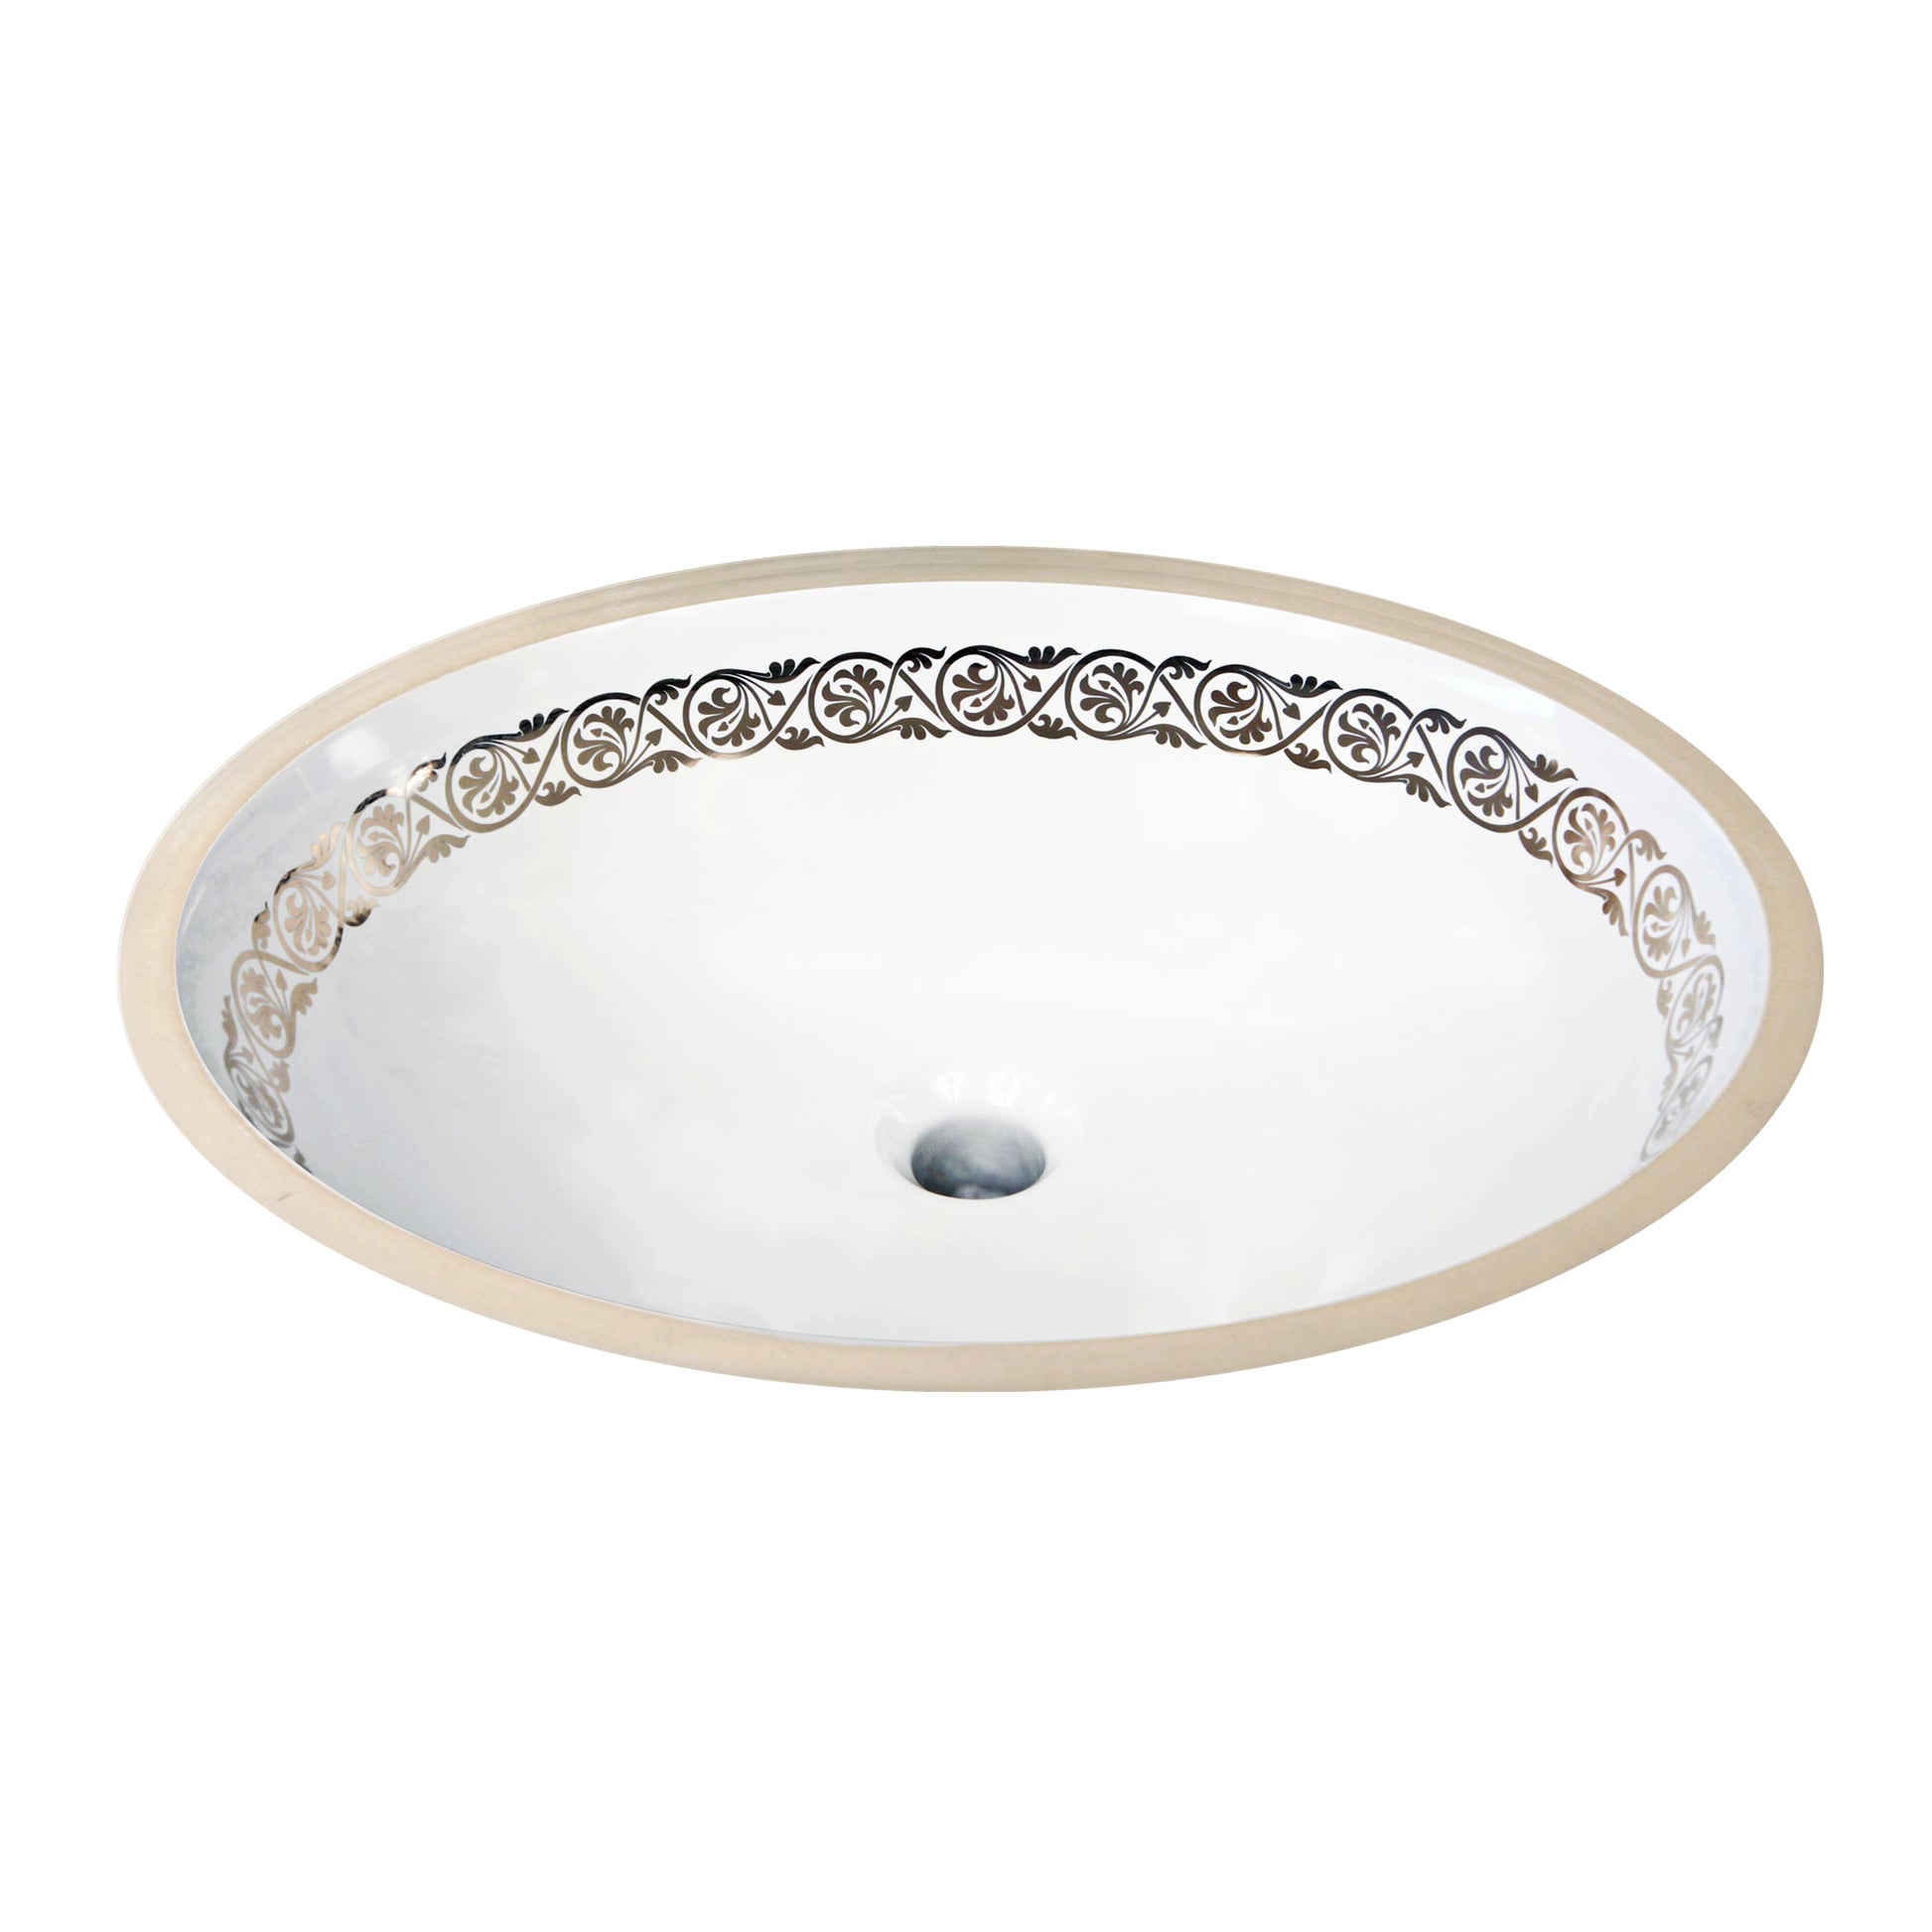 Undermount Bathroom Sink Painted with ornate gold or platinum border and made in the USA.